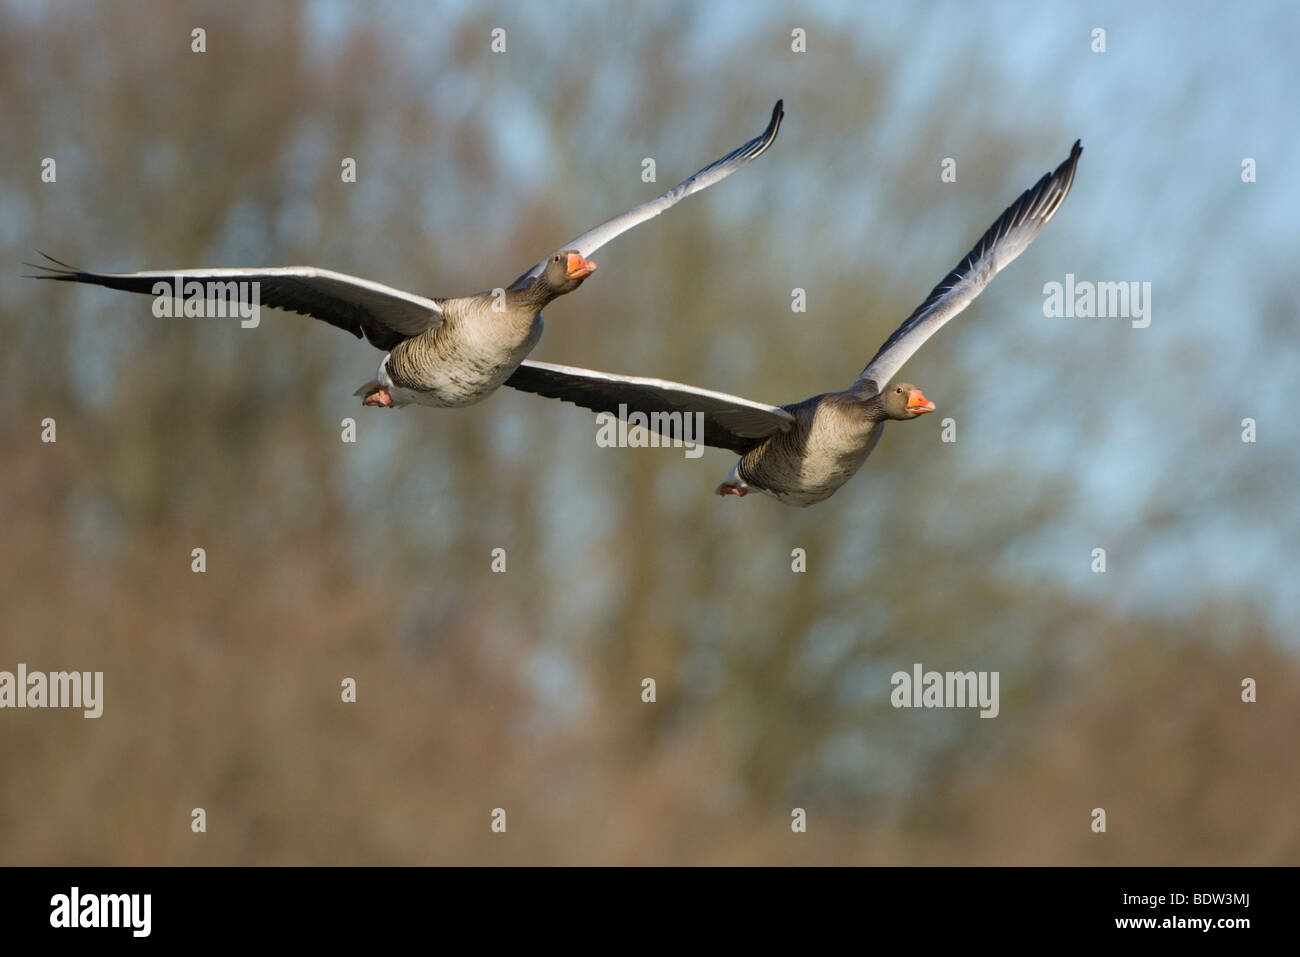 twoi greylag geese in flight Stock Photo